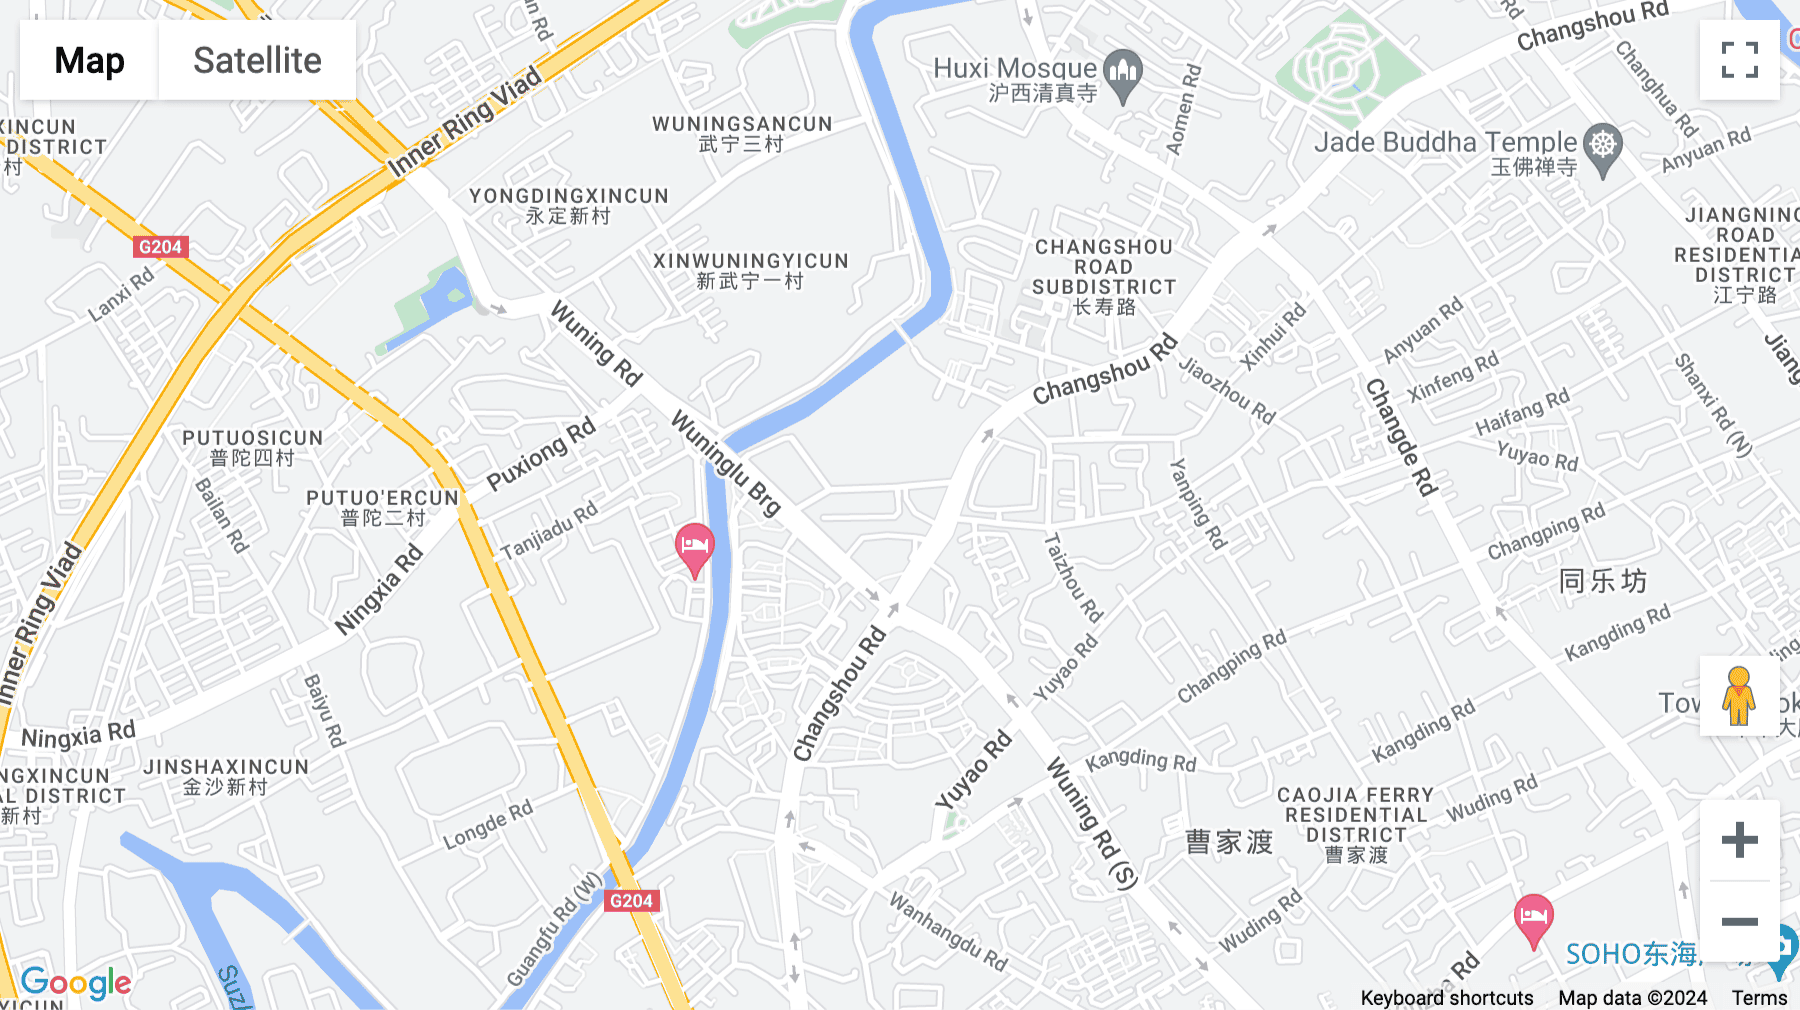 Click for interative map of Trinity Place, 868 Changshou Road, Shanghai 200060, Shanghai